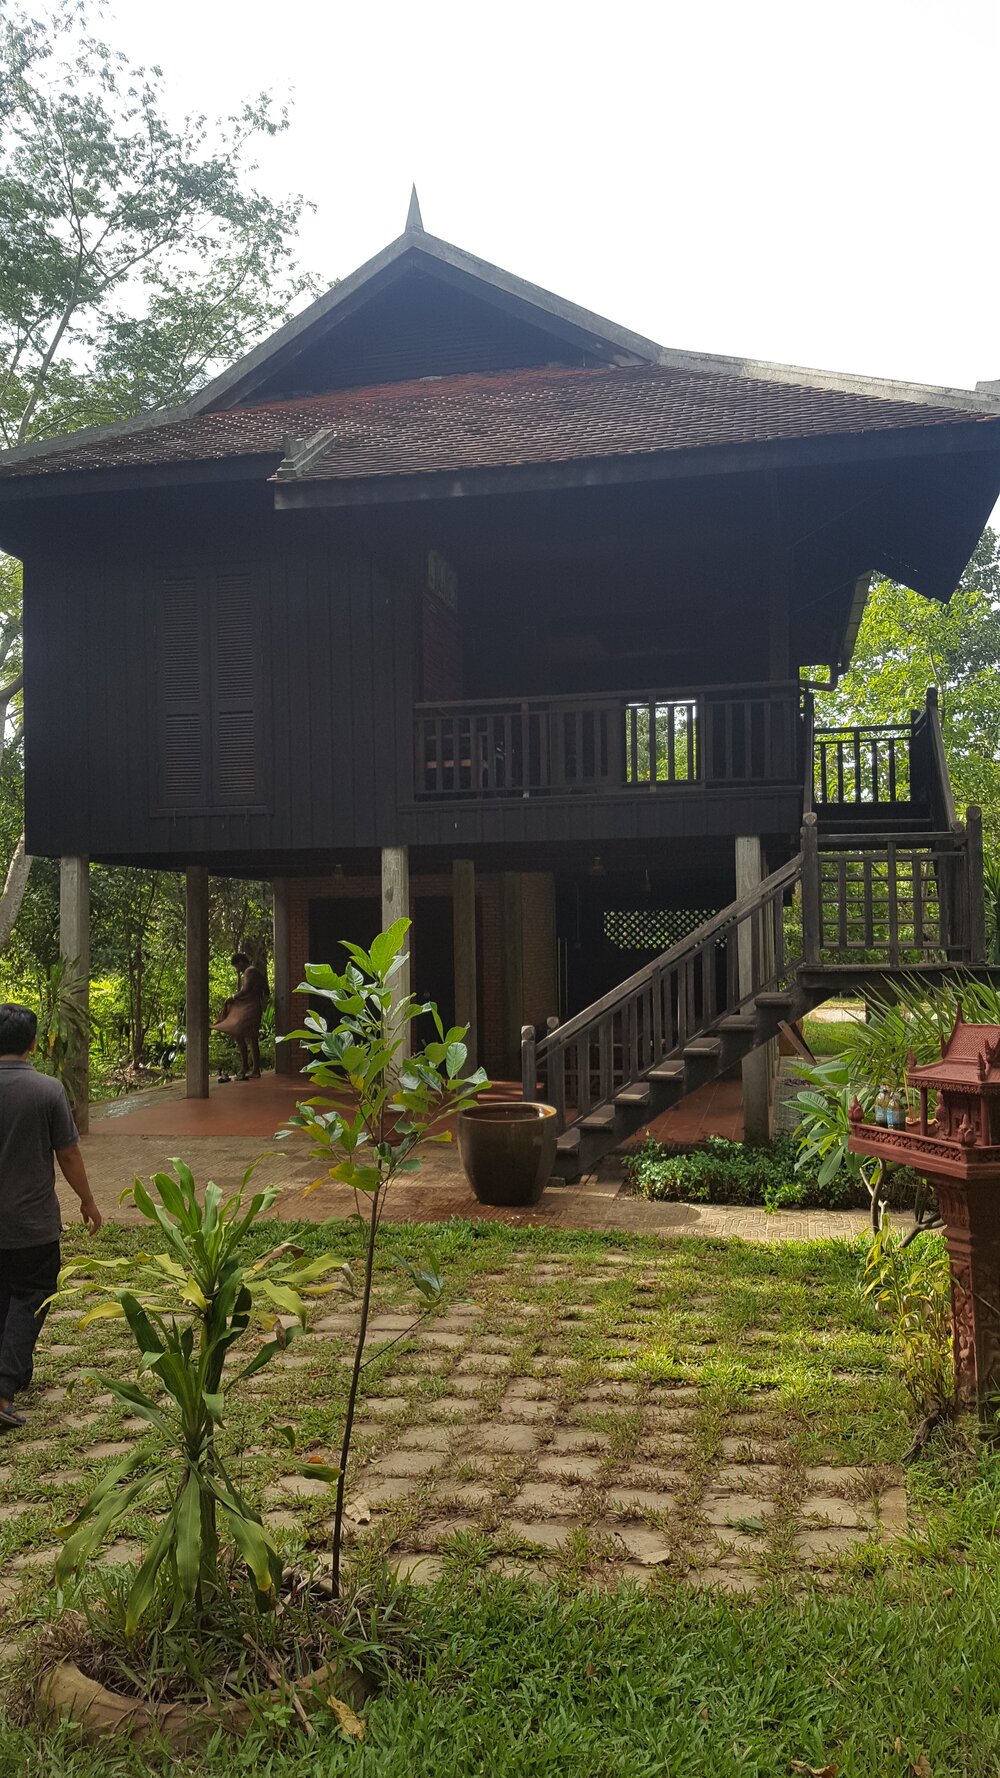 A traditional Cambodian house